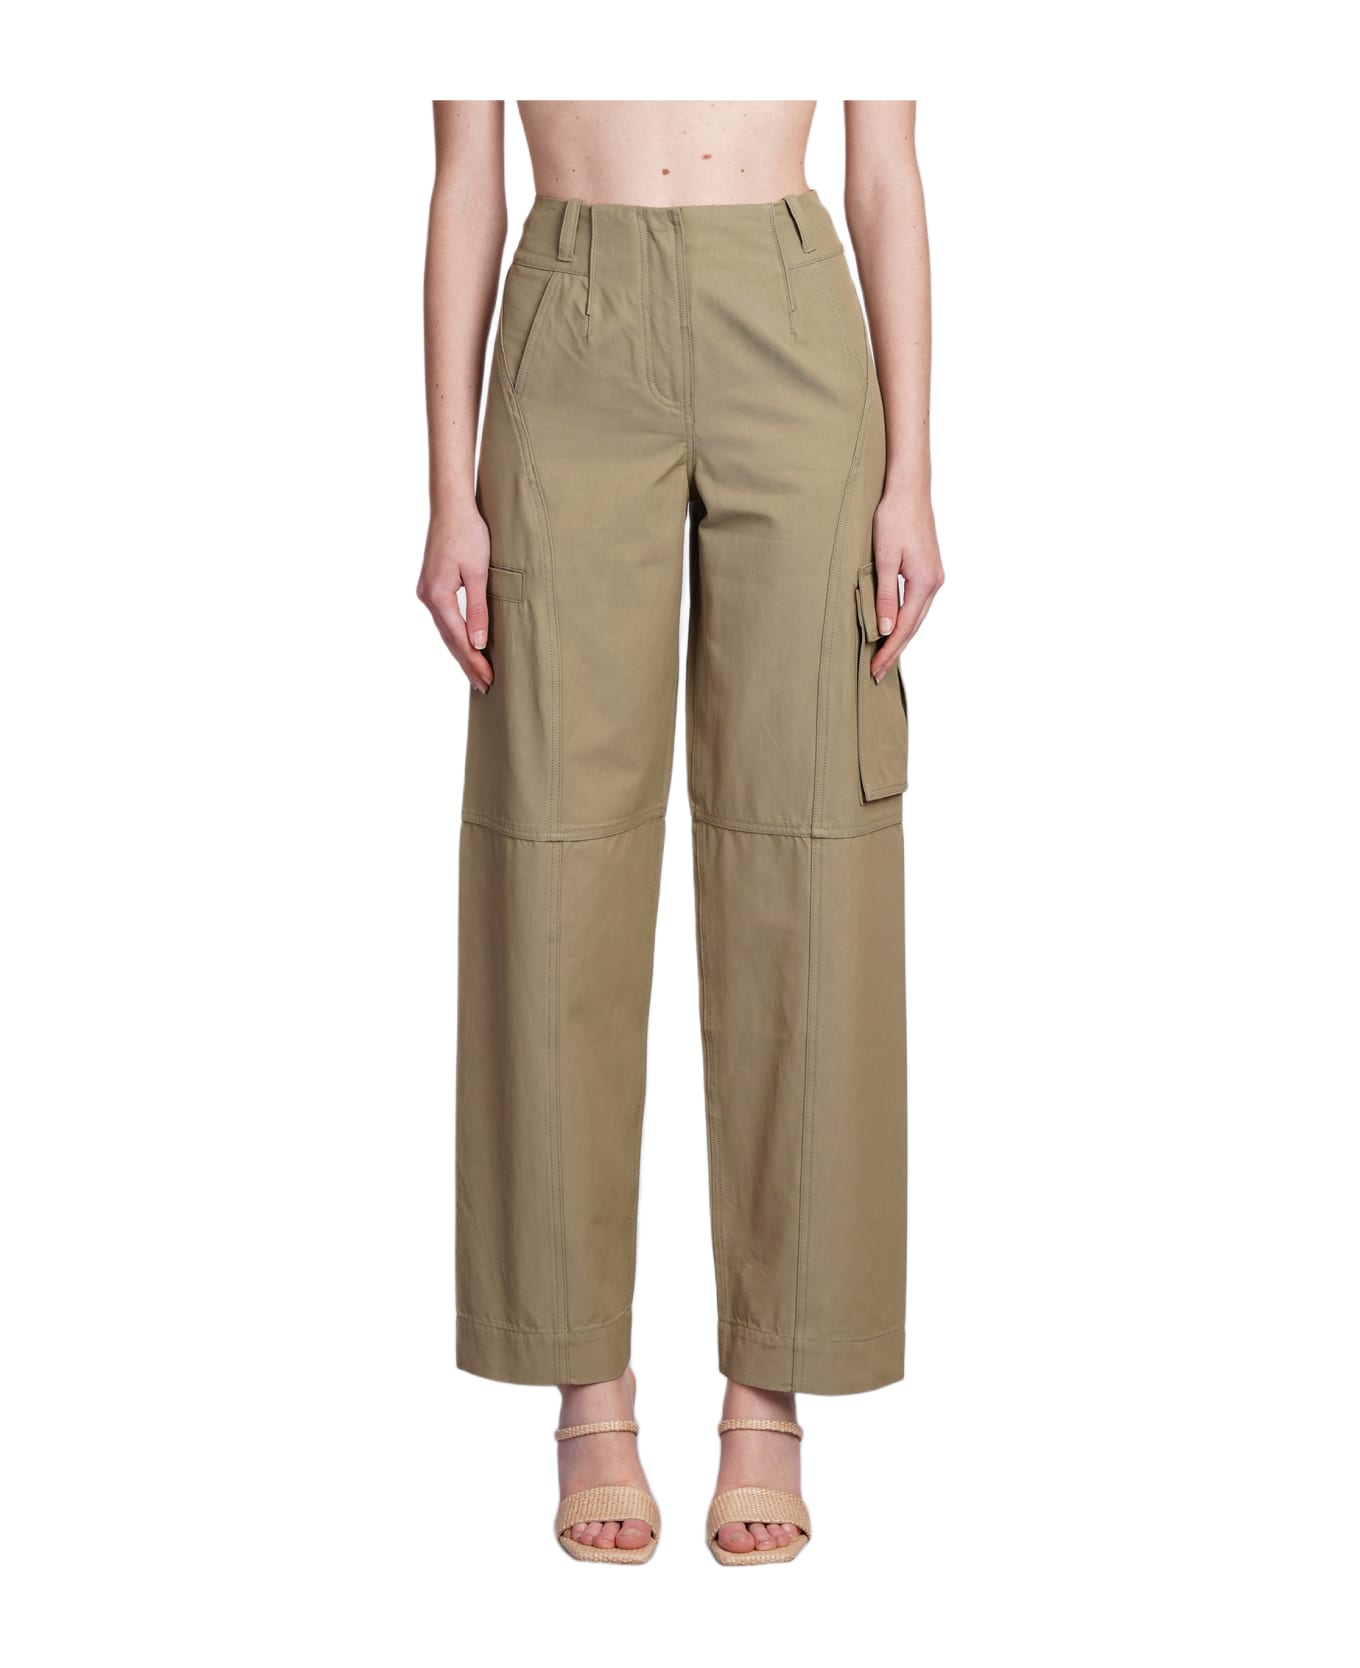 Cult Gaia Adrie Pants In Green Cotton - green ボトムス